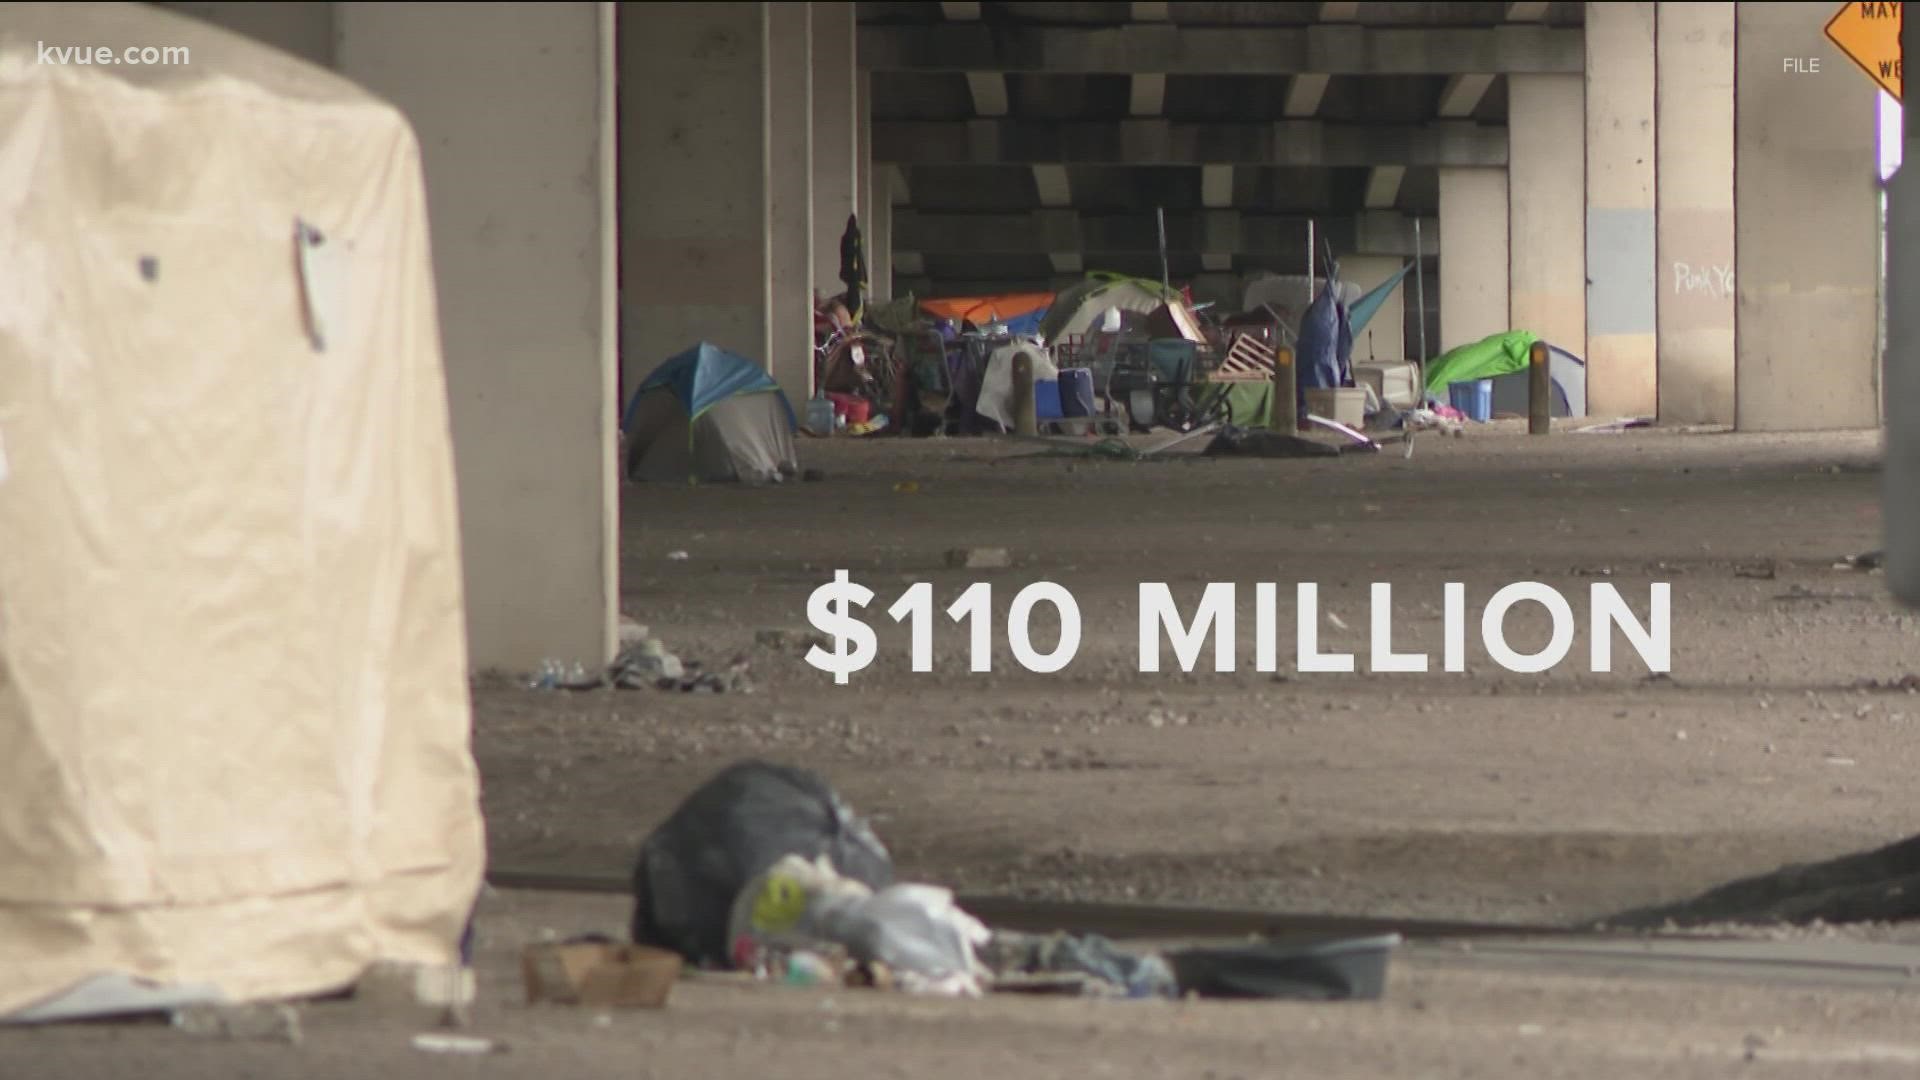 The Travis County Commissioners voted to use $110 million in federal COVID relief money to help the homeless and build more affordable housing.